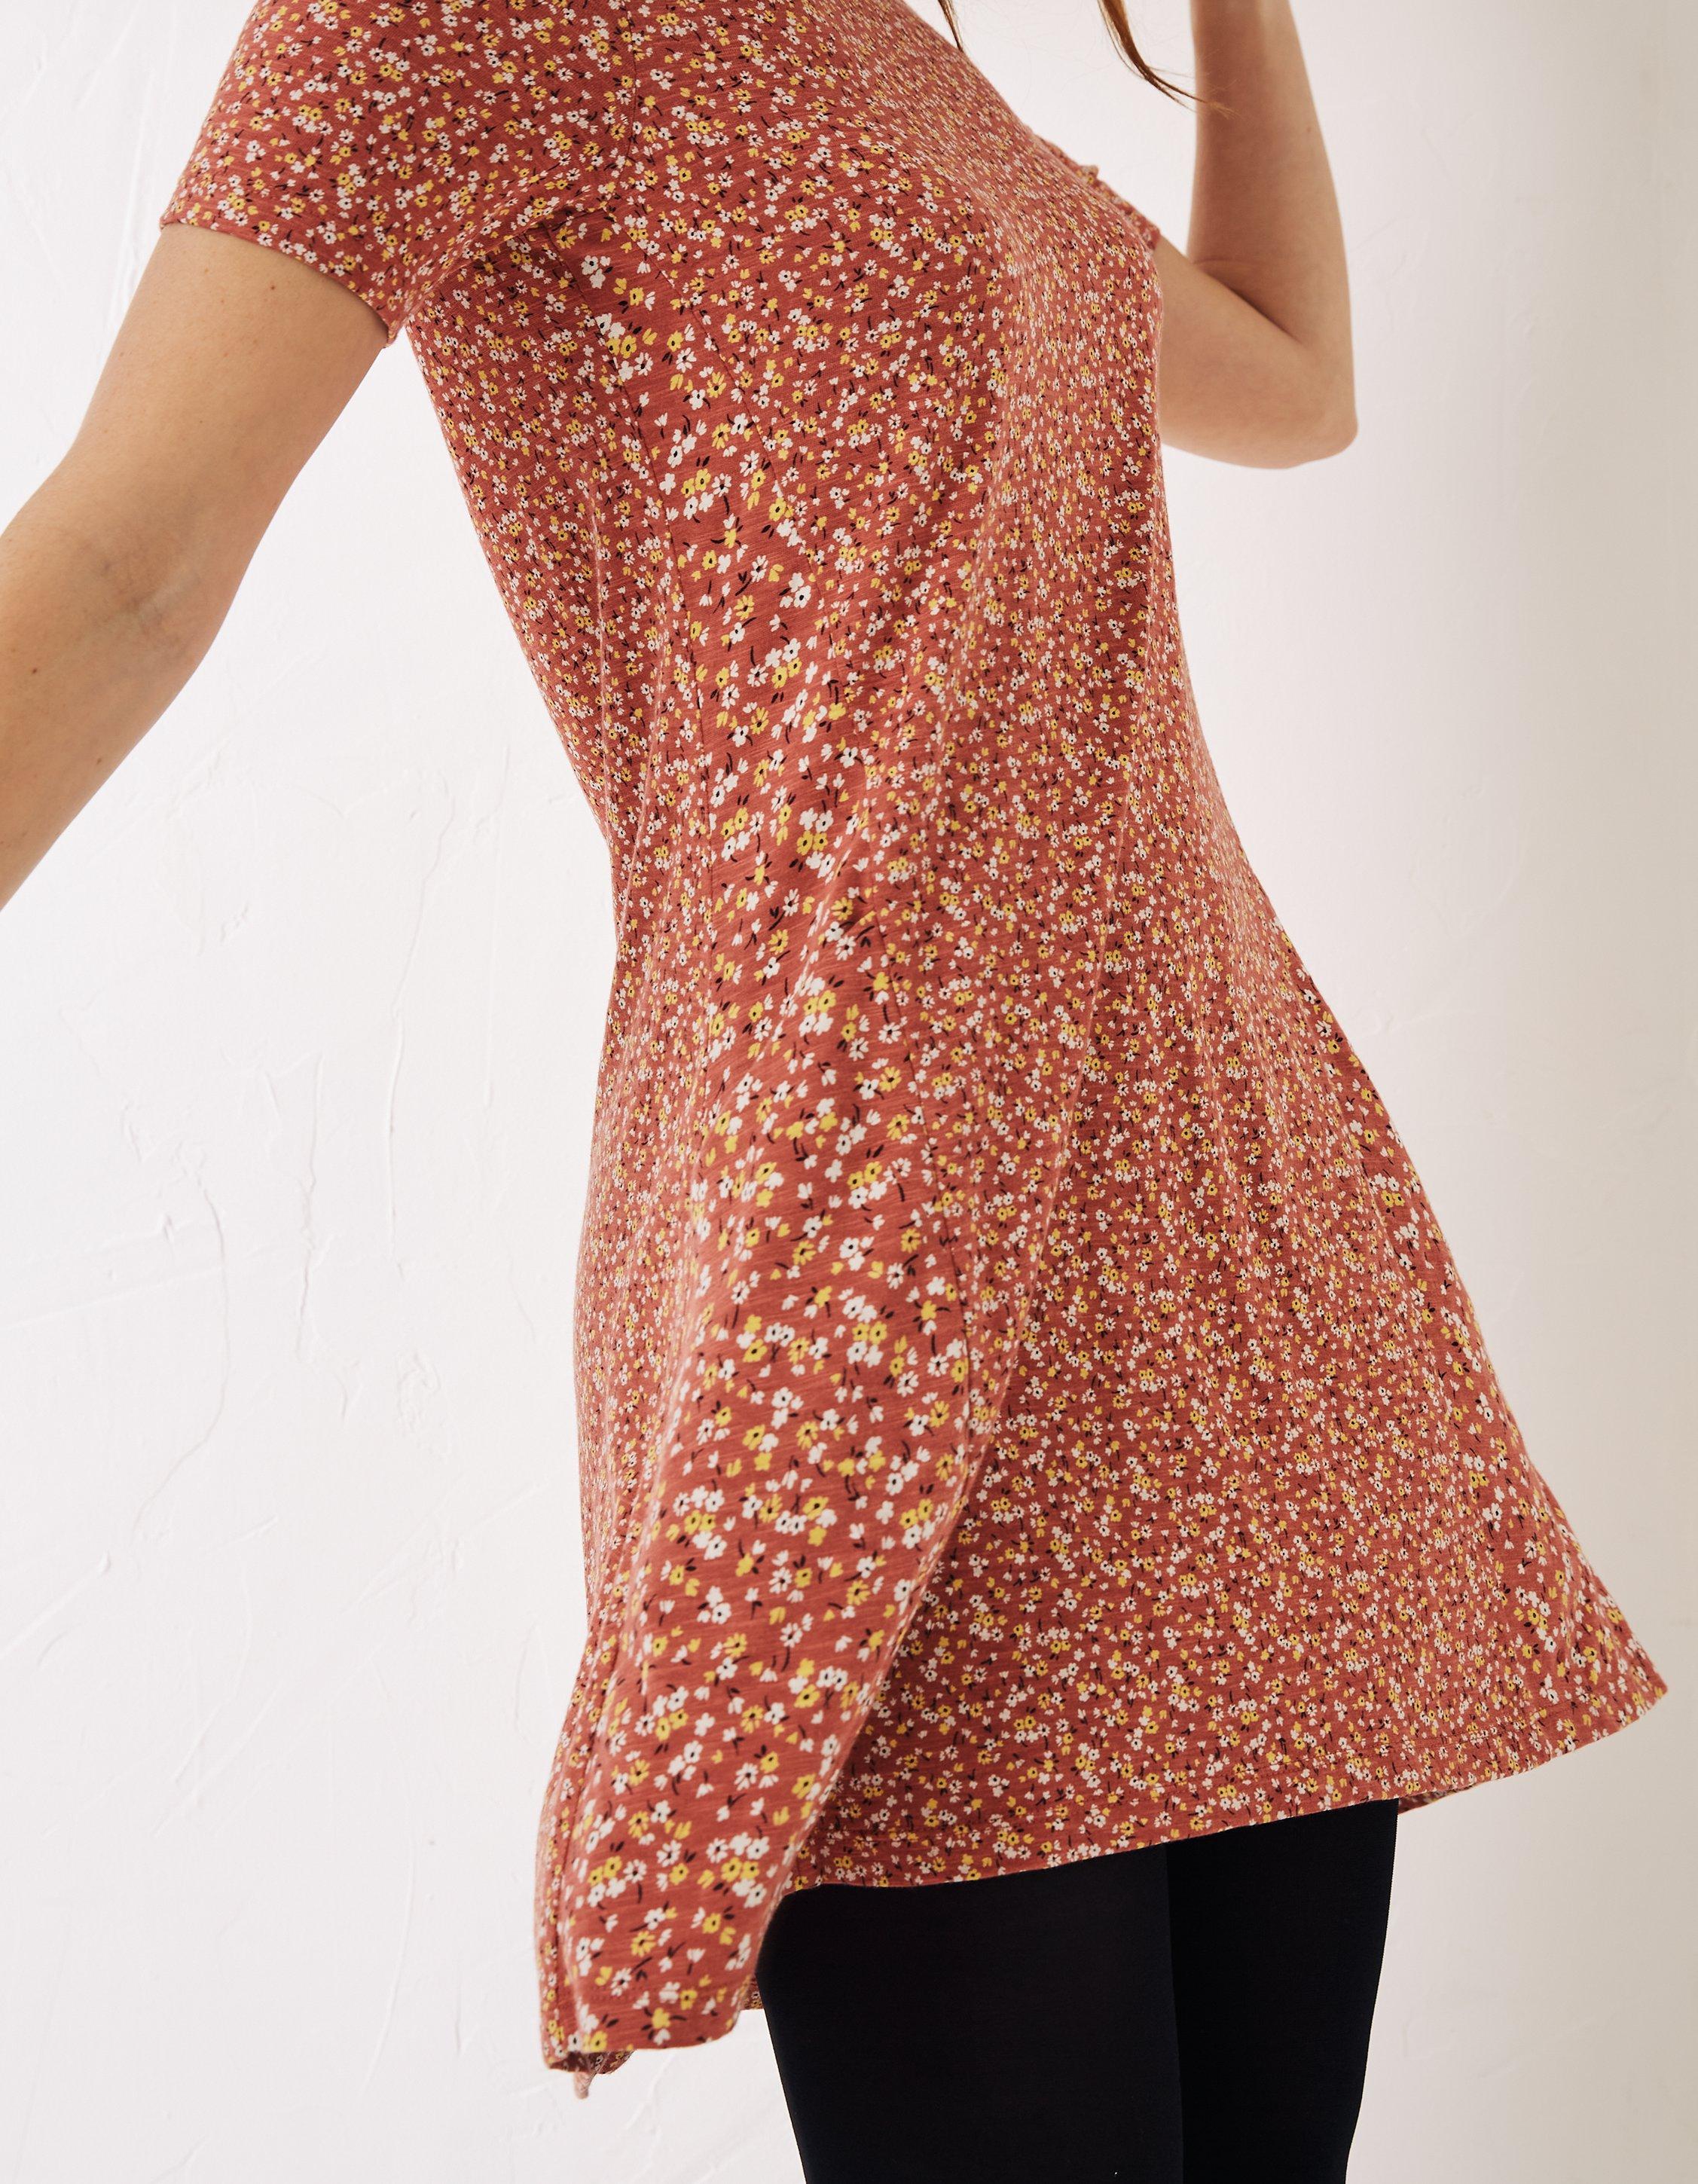 Soft Ditsy Floral Print, Soft Touch Jersey Shirt